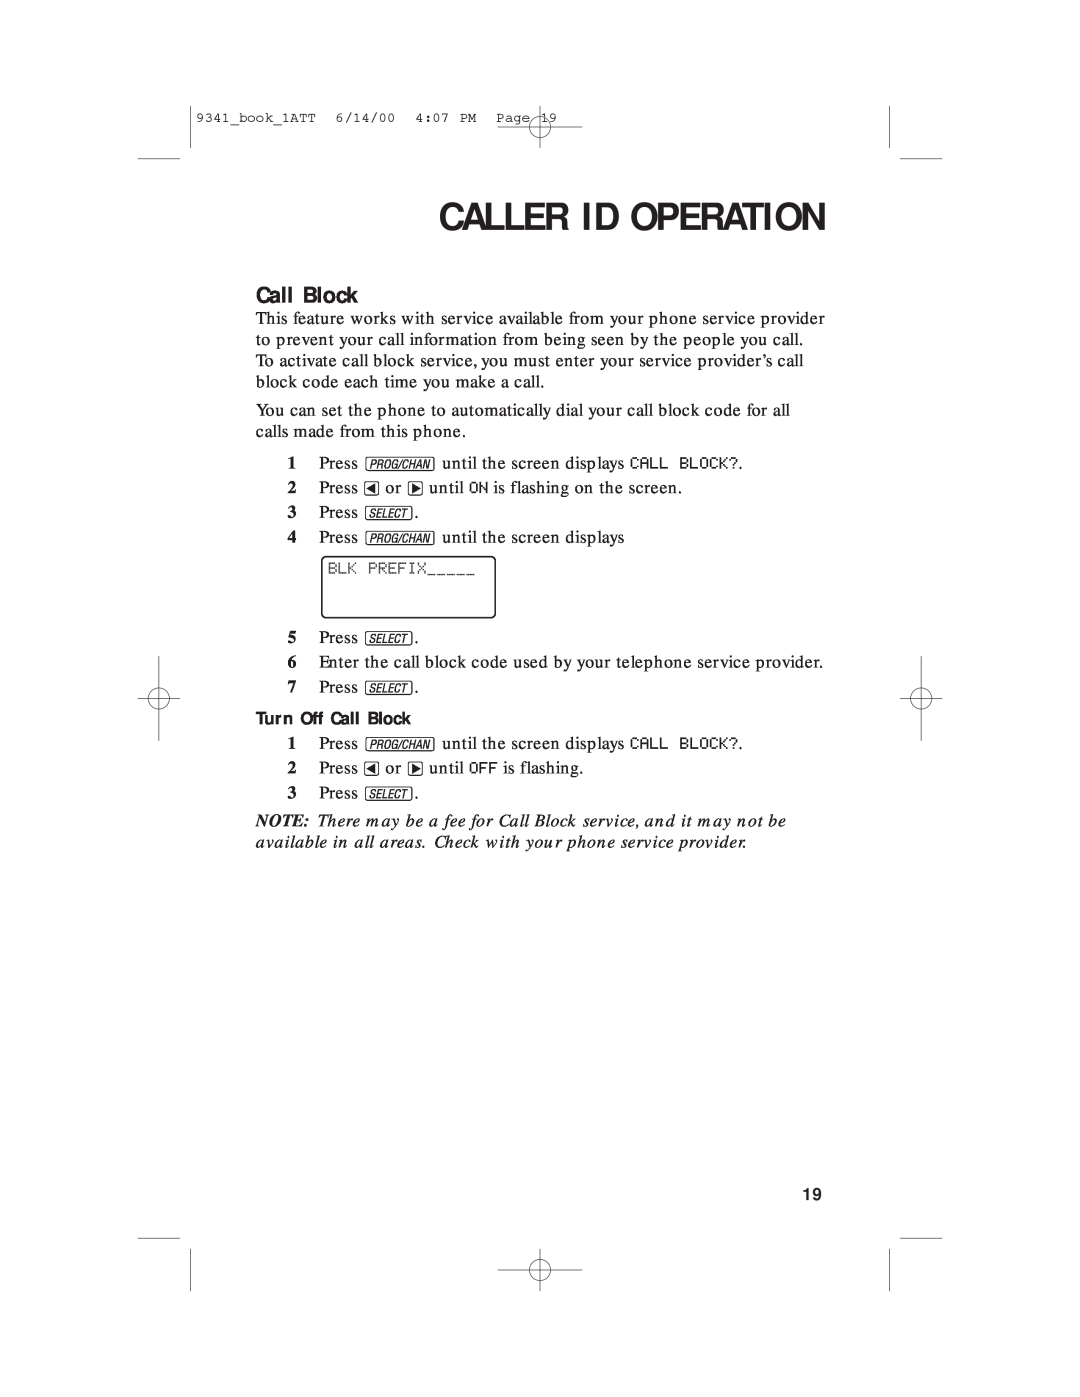 AT&T 9341 user manual Turn Off Call Block, Caller Id Operation 